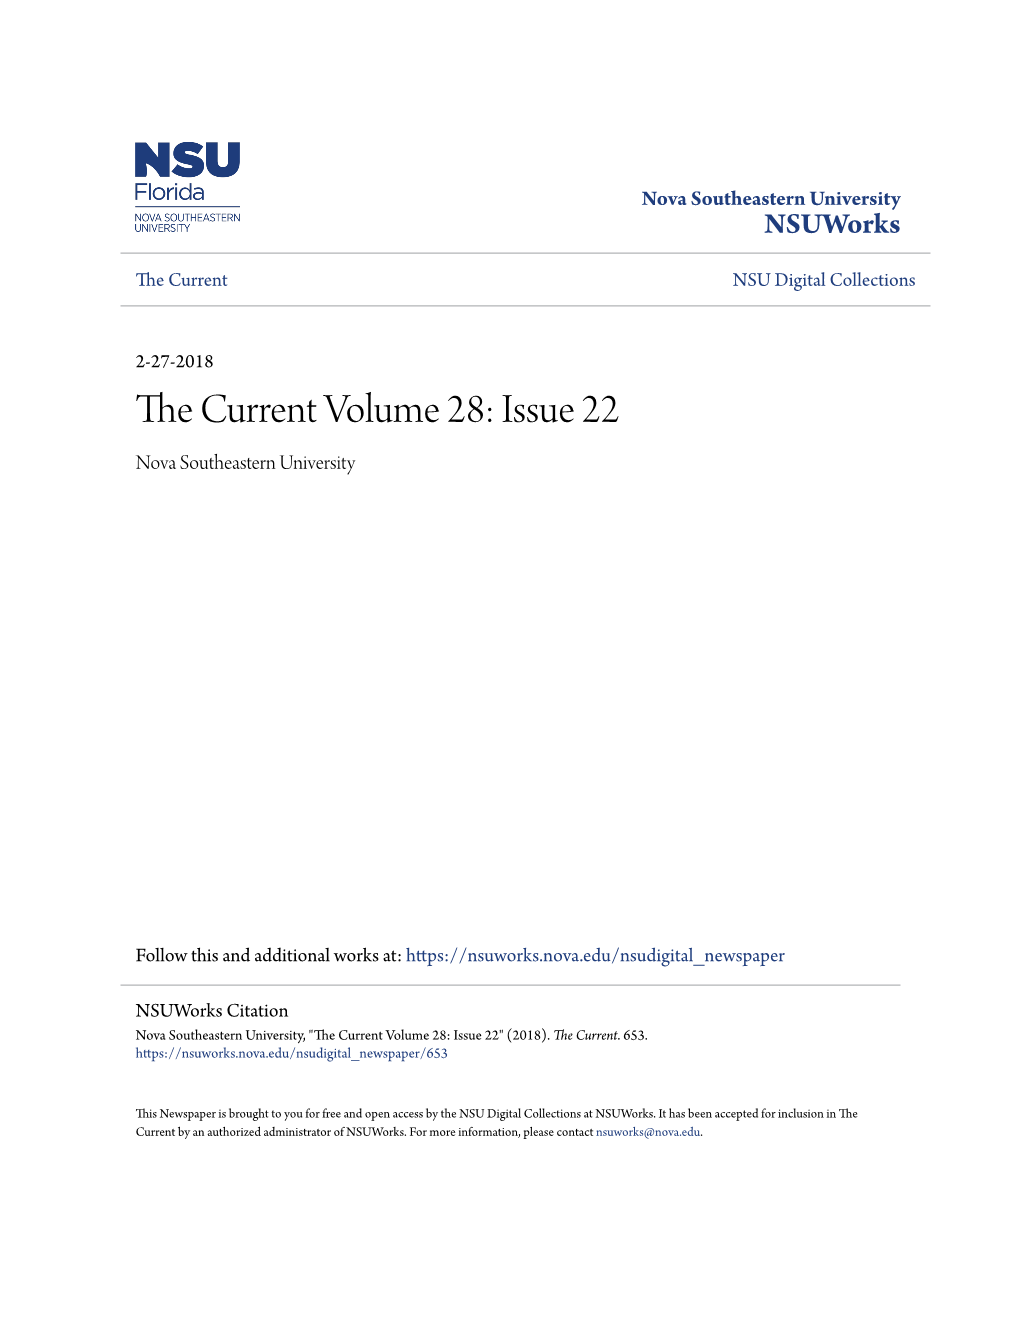 The Current Volume 28: Issue 22